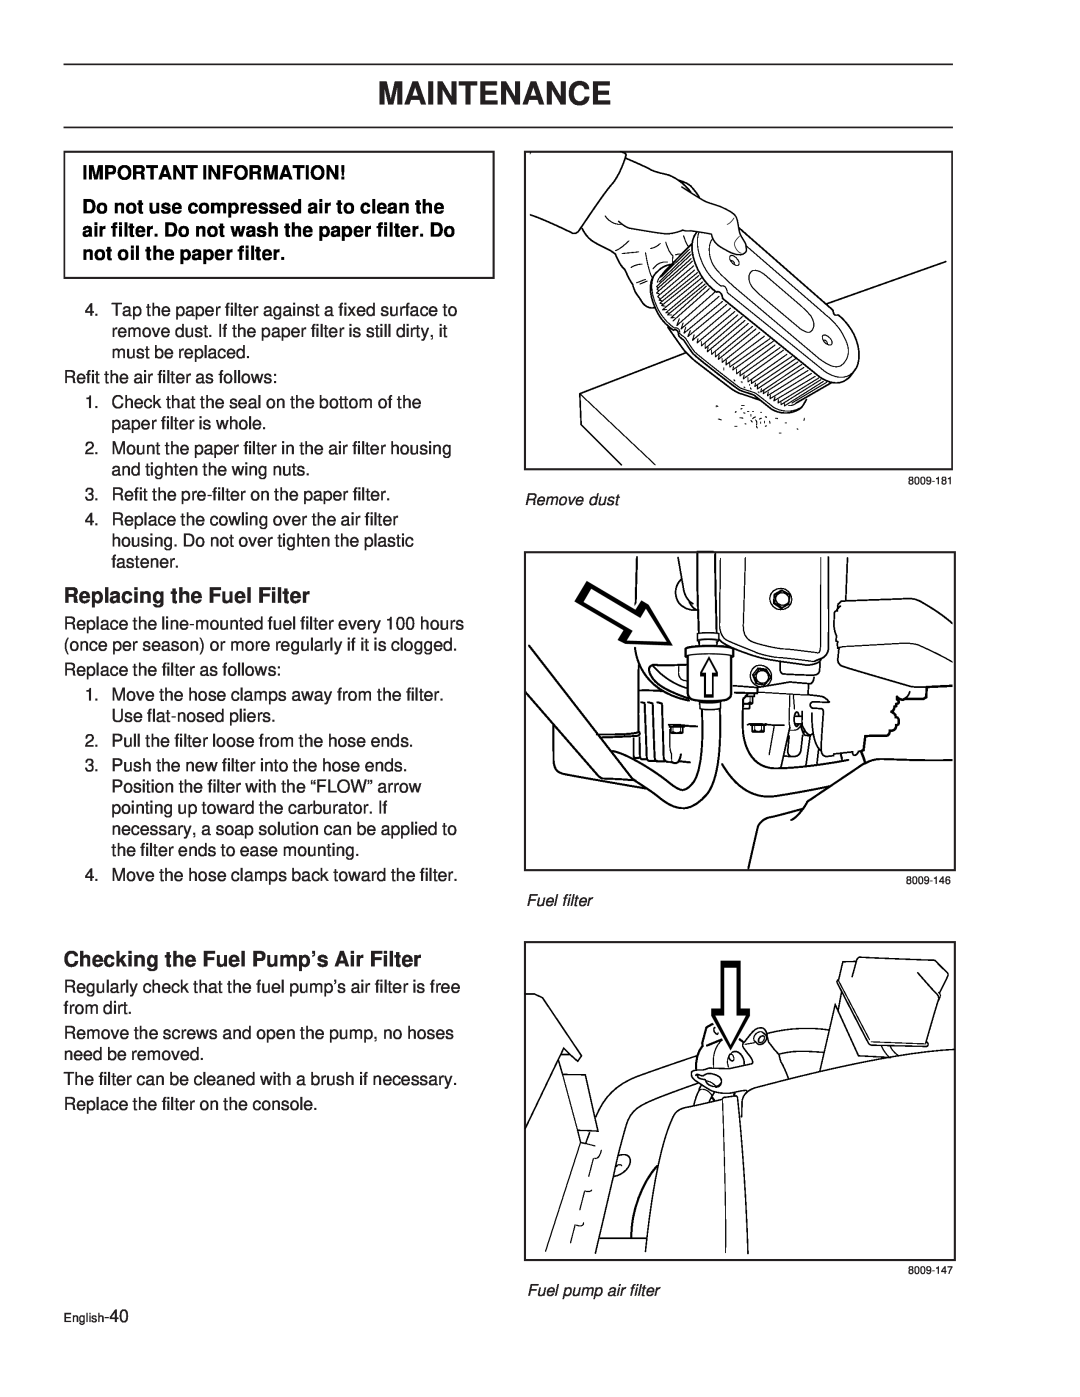 Dixon 42 / 968999713 Replacing the Fuel Filter, Checking the Fuel Pump’s Air Filter, Maintenance, Important Information 